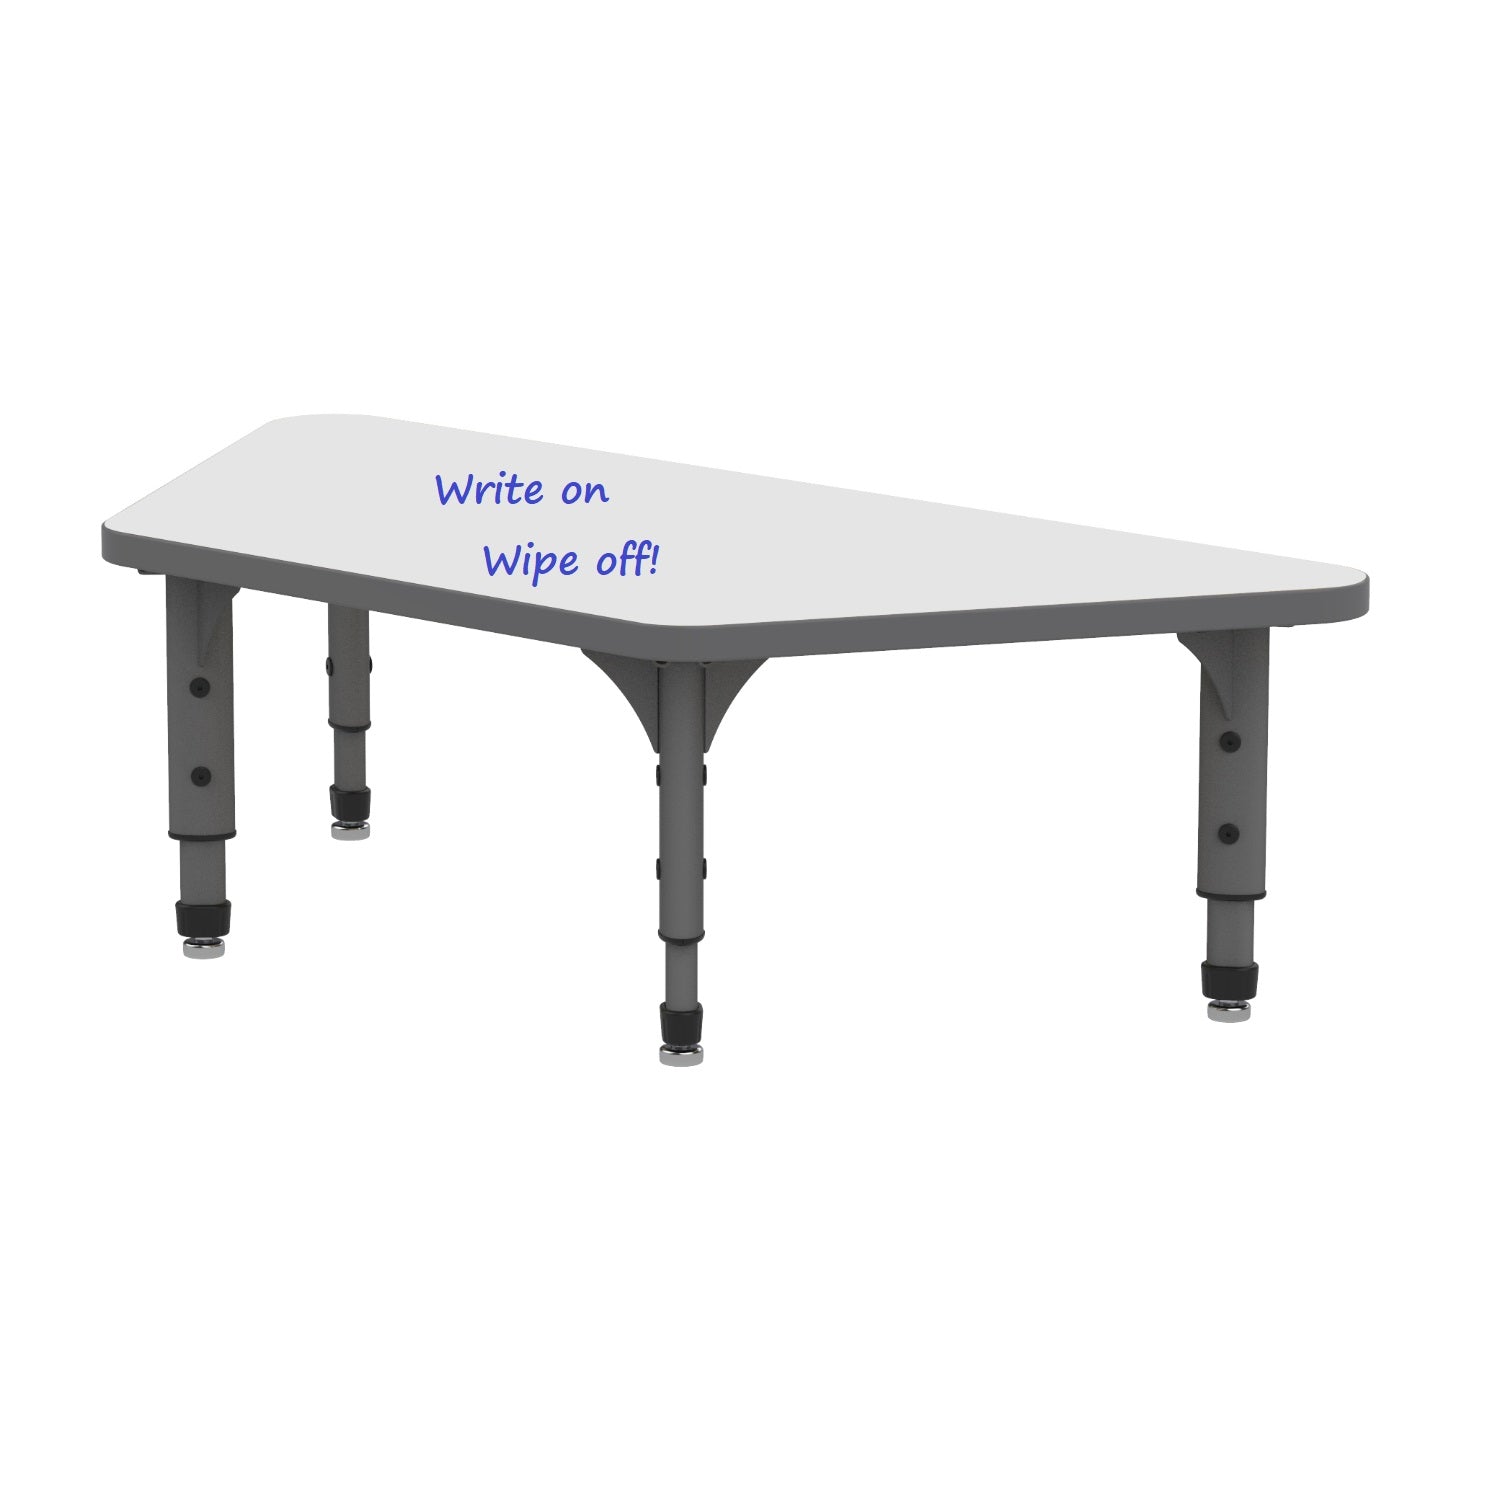 Adjustable Height Floor Activity Table with White Dry-Erase Markerboard Top, 24" x 48" Trapezoid